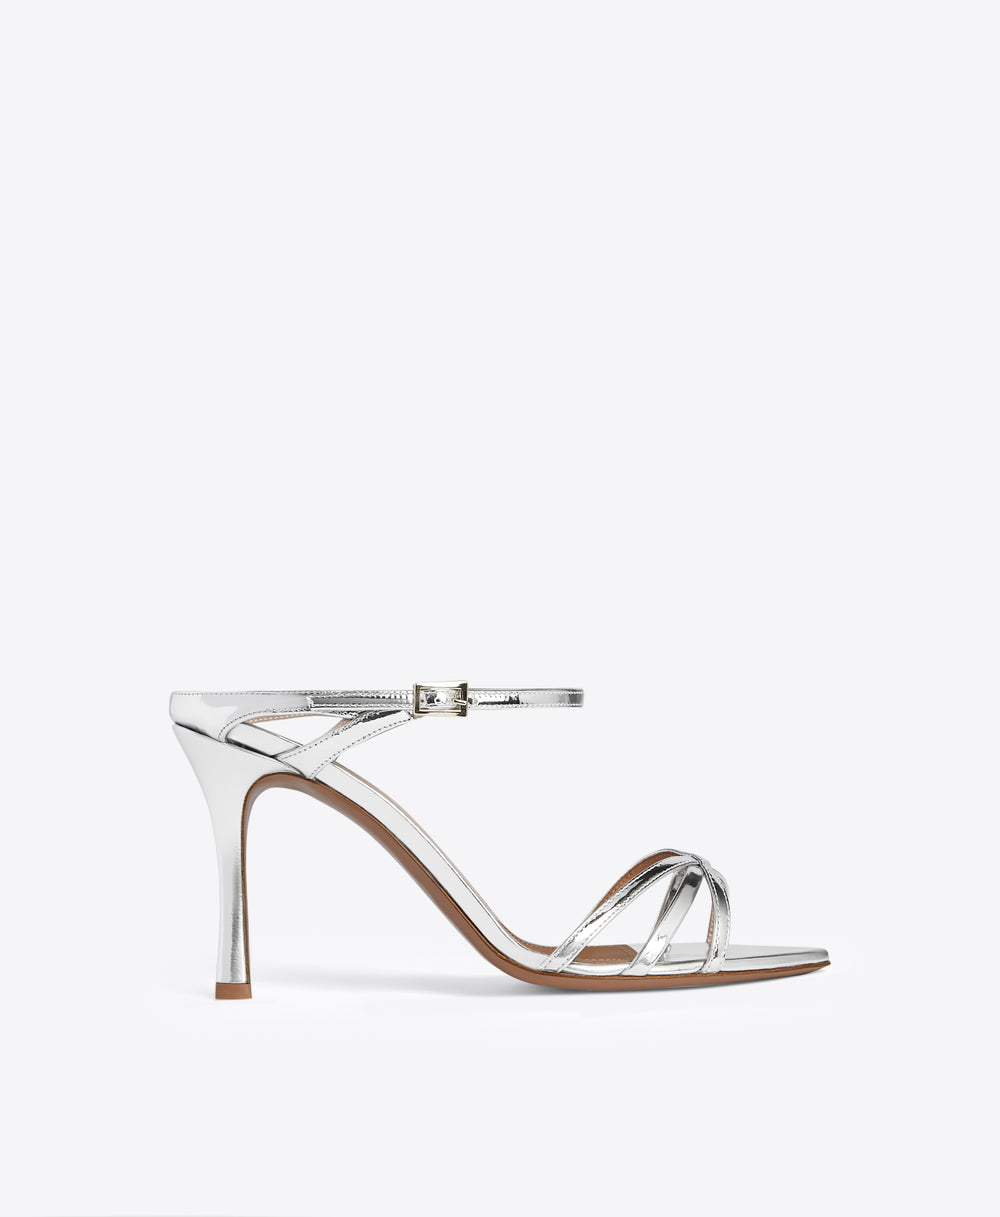 Yuna 90 Silver Mirror Leather Sandals Malone Souliers